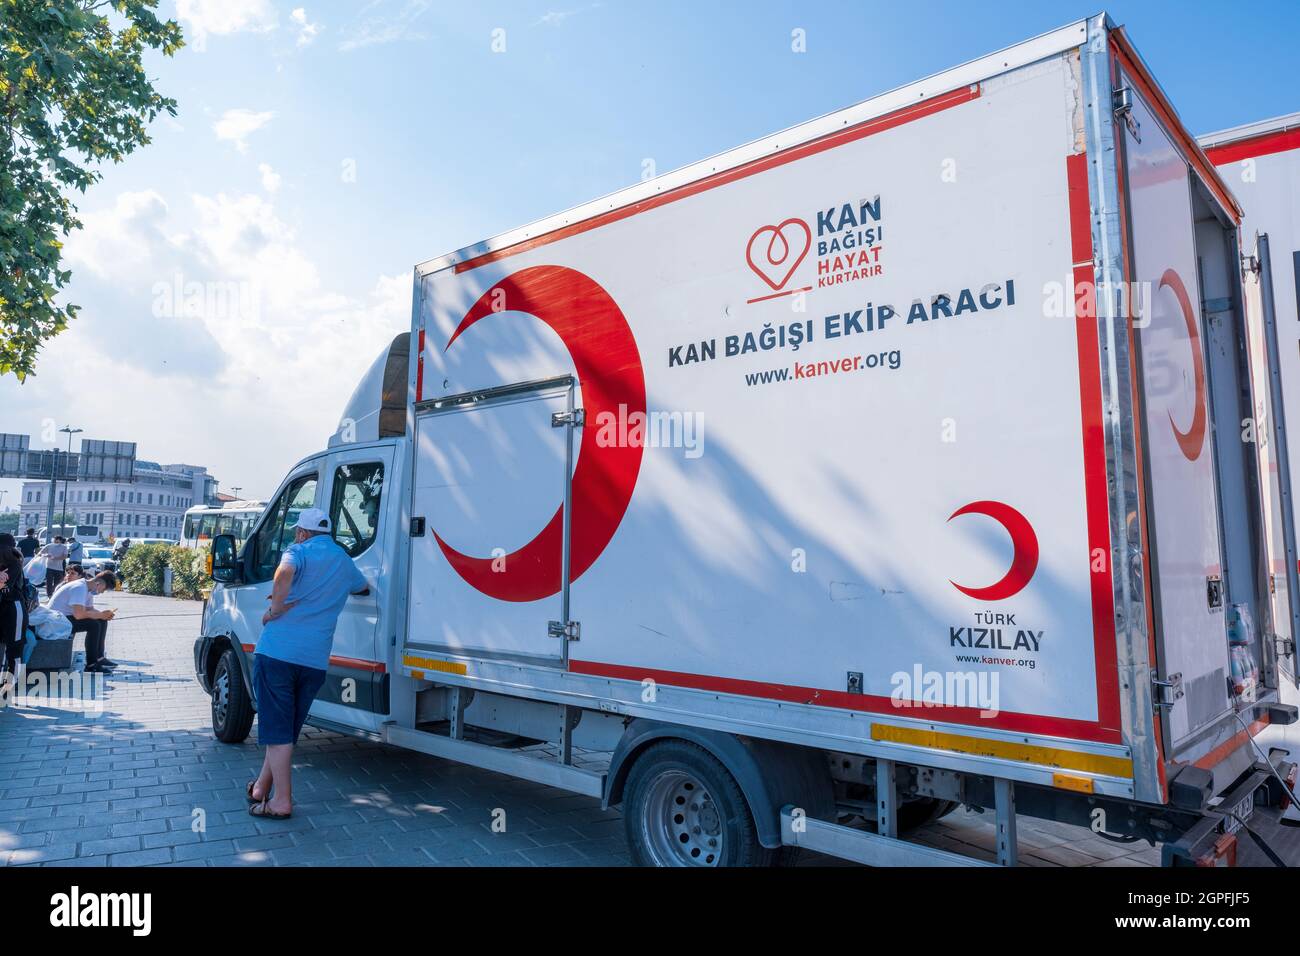 Eminonu, Istanbul, Turkey - 07.05.2021: blood donation vehicle of Turkish Red Crescent (Türk Kizilay) parked in square in a hot summer day with copy s Stock Photo